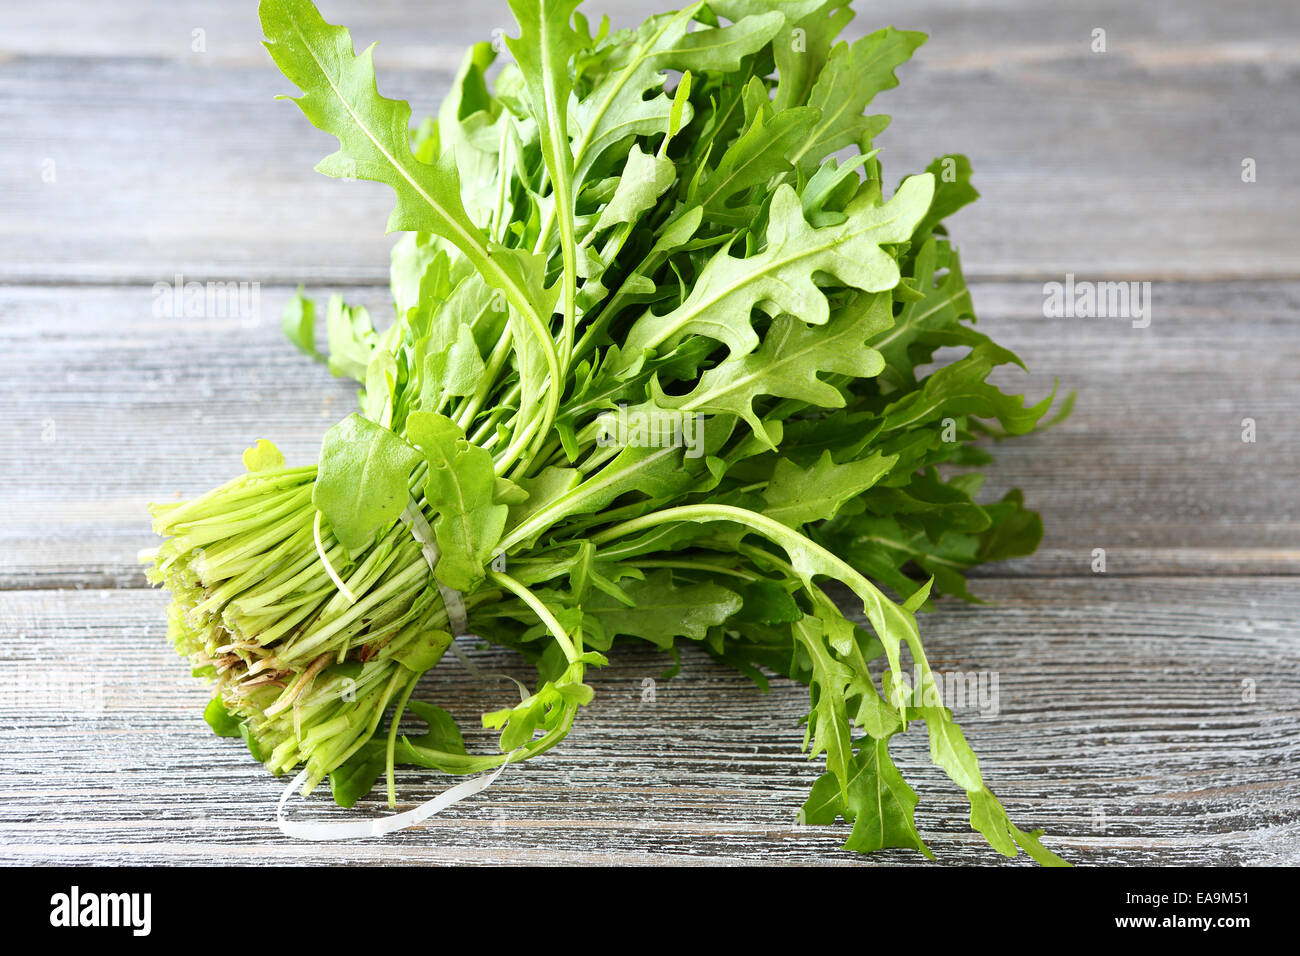 Arugula on the boards, wooden background Stock Photo